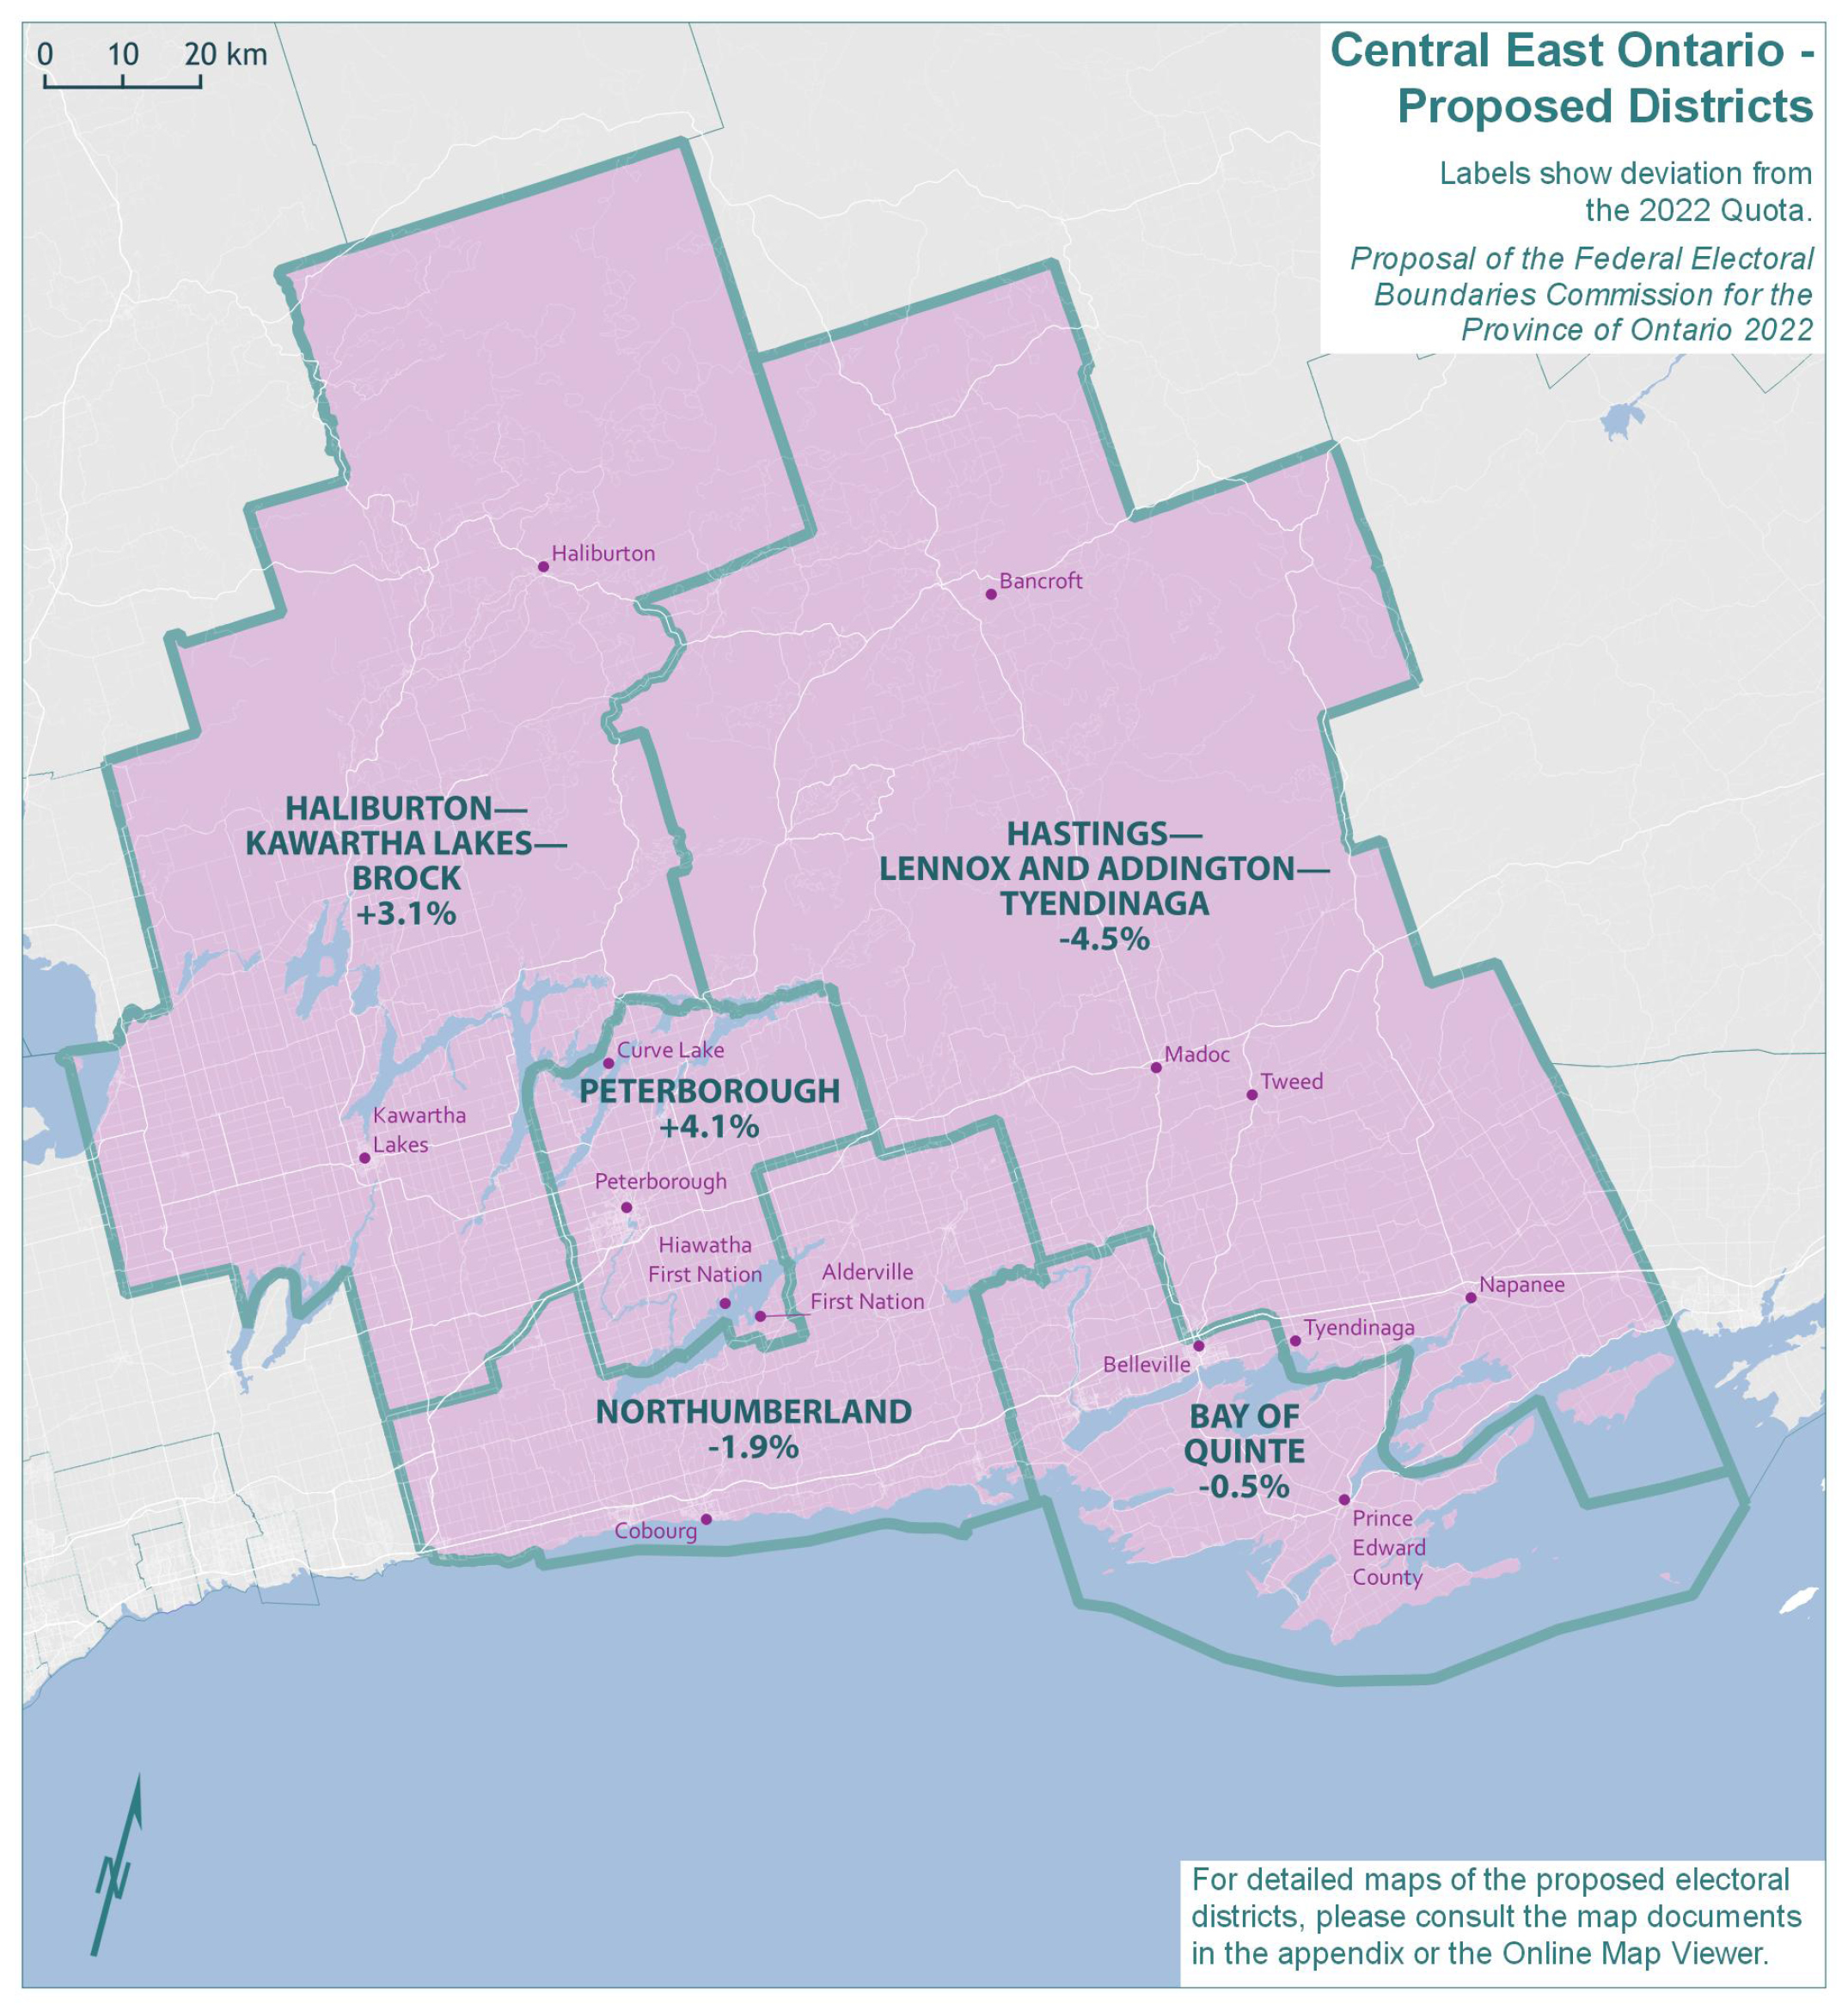 Central East Ontario - Proposed Districts